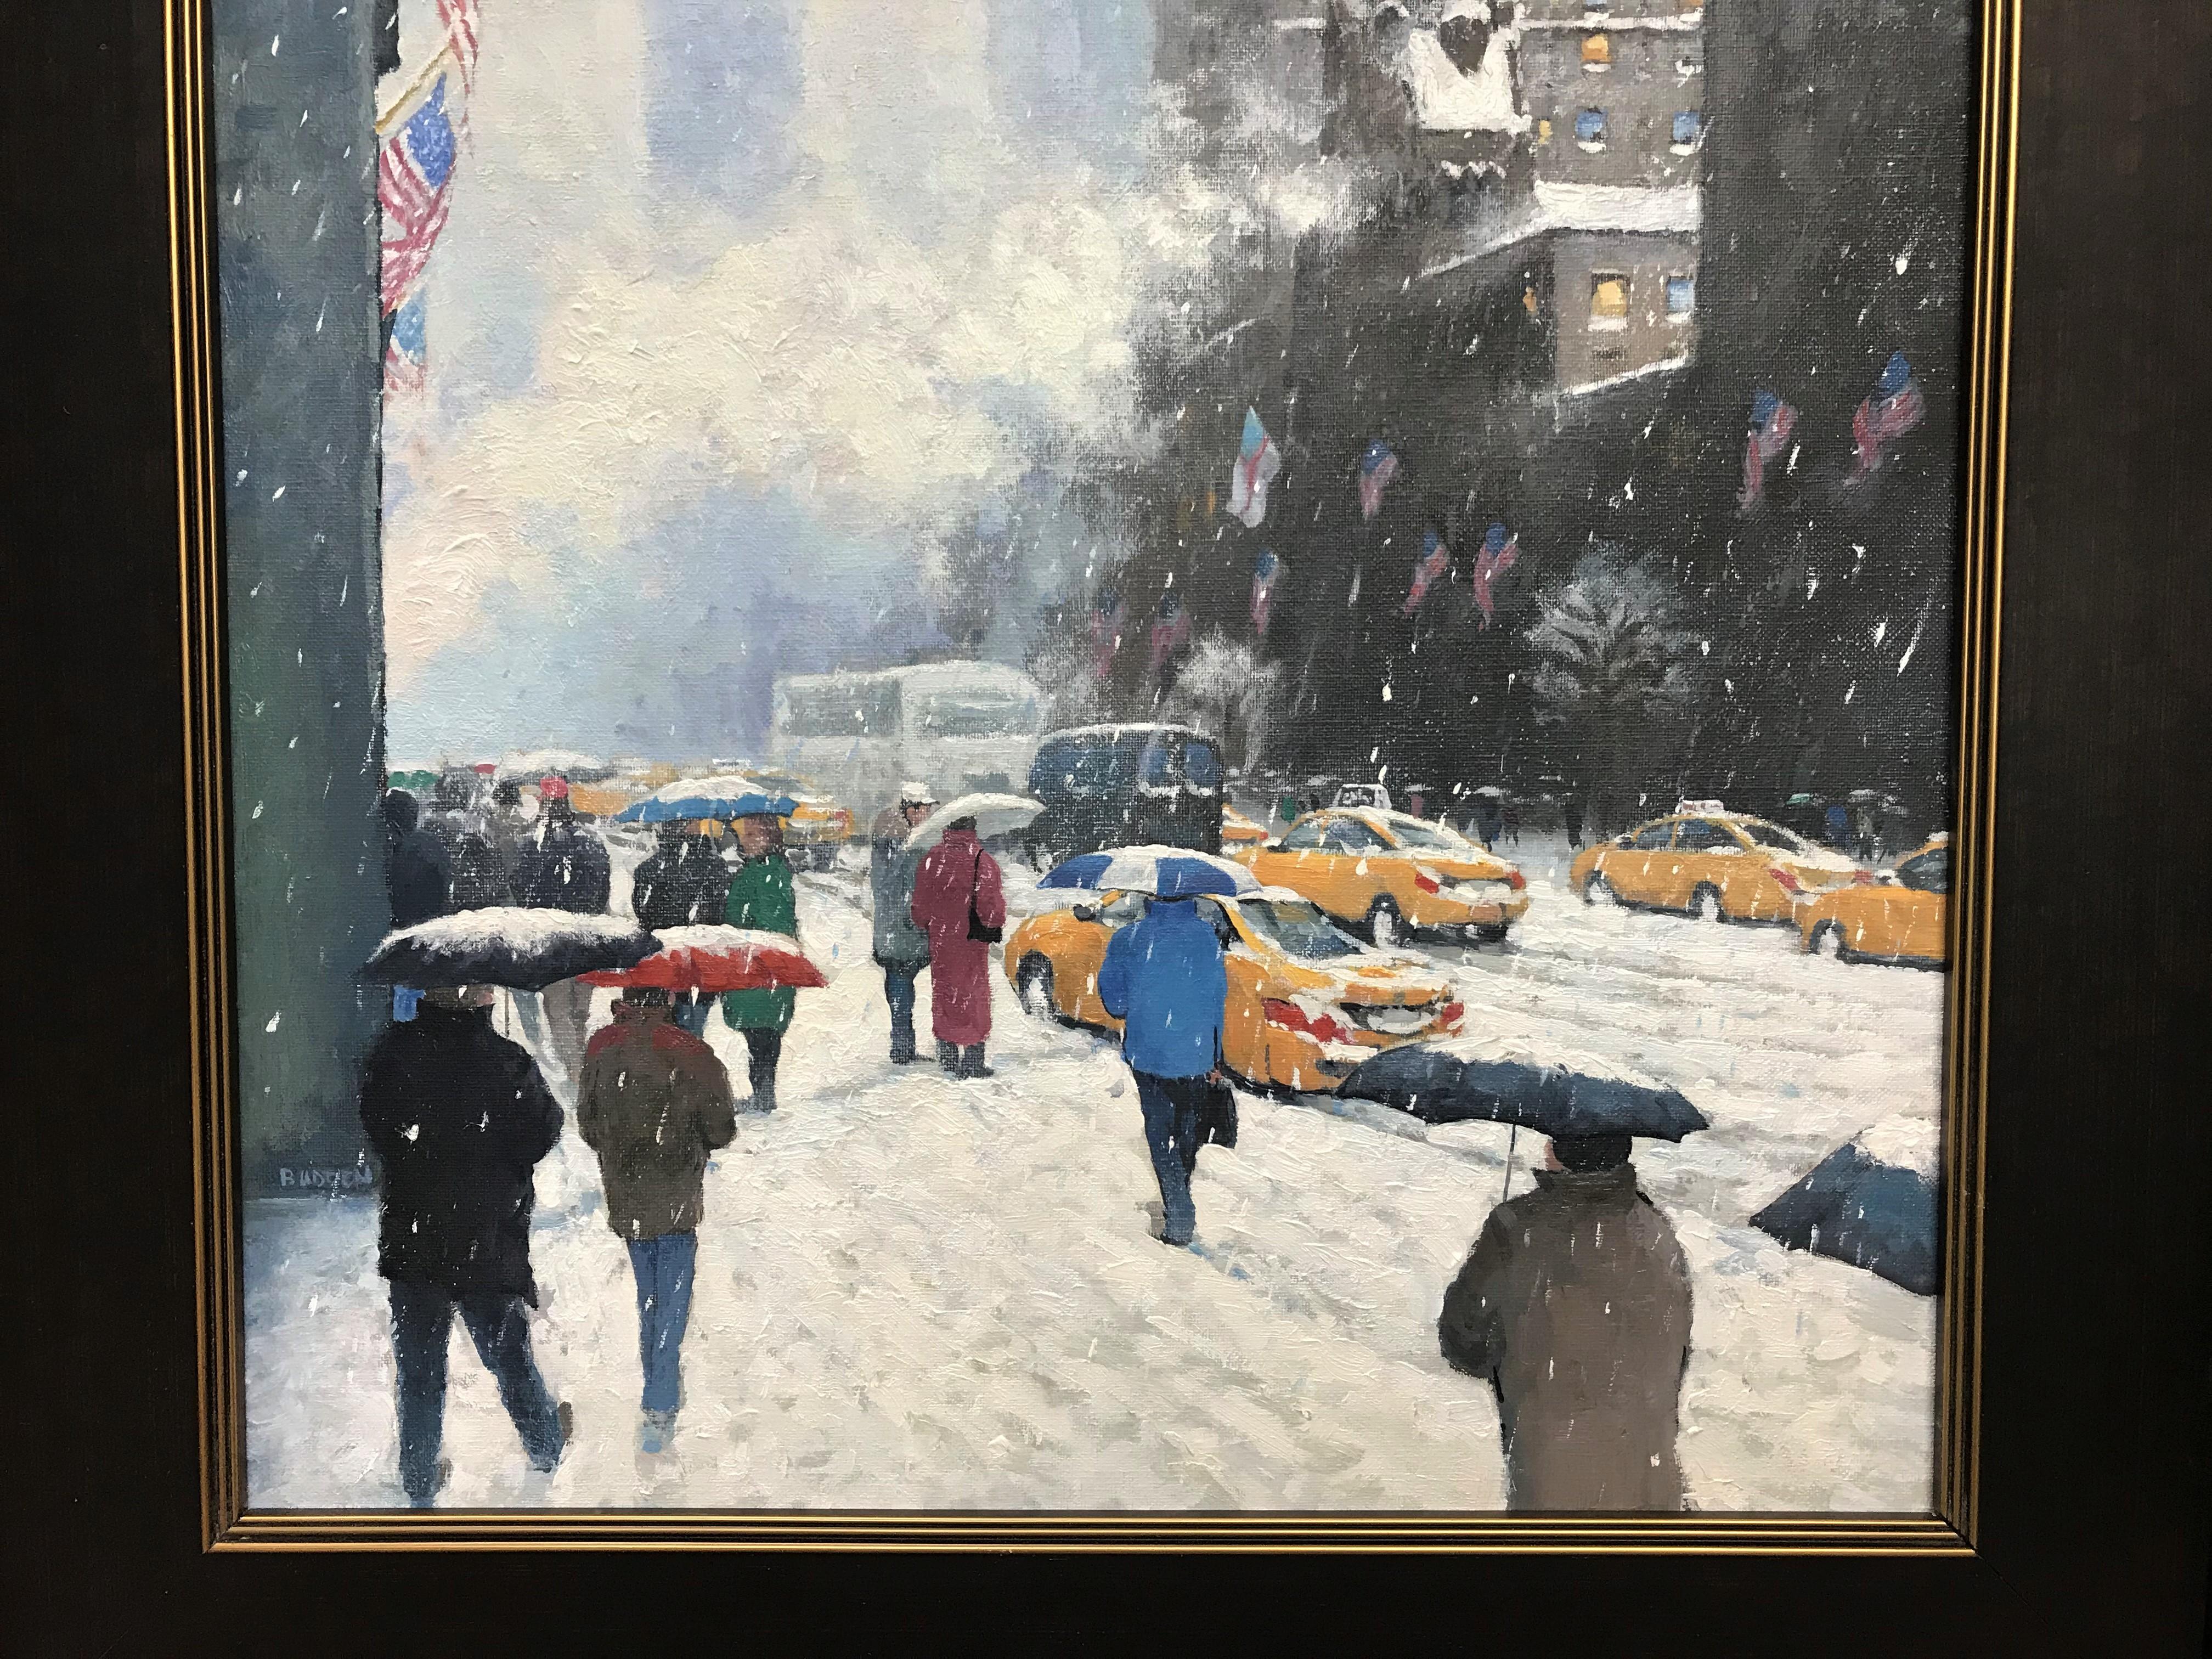 Newly revised and updated, Upper Fifth Avenue Flags is an oil painting on linen by award winning contemporary artist Michael Budden that showcases the bustling life and the beautiful winter flags along Fifth Ave in NYC looking towrads the Empire